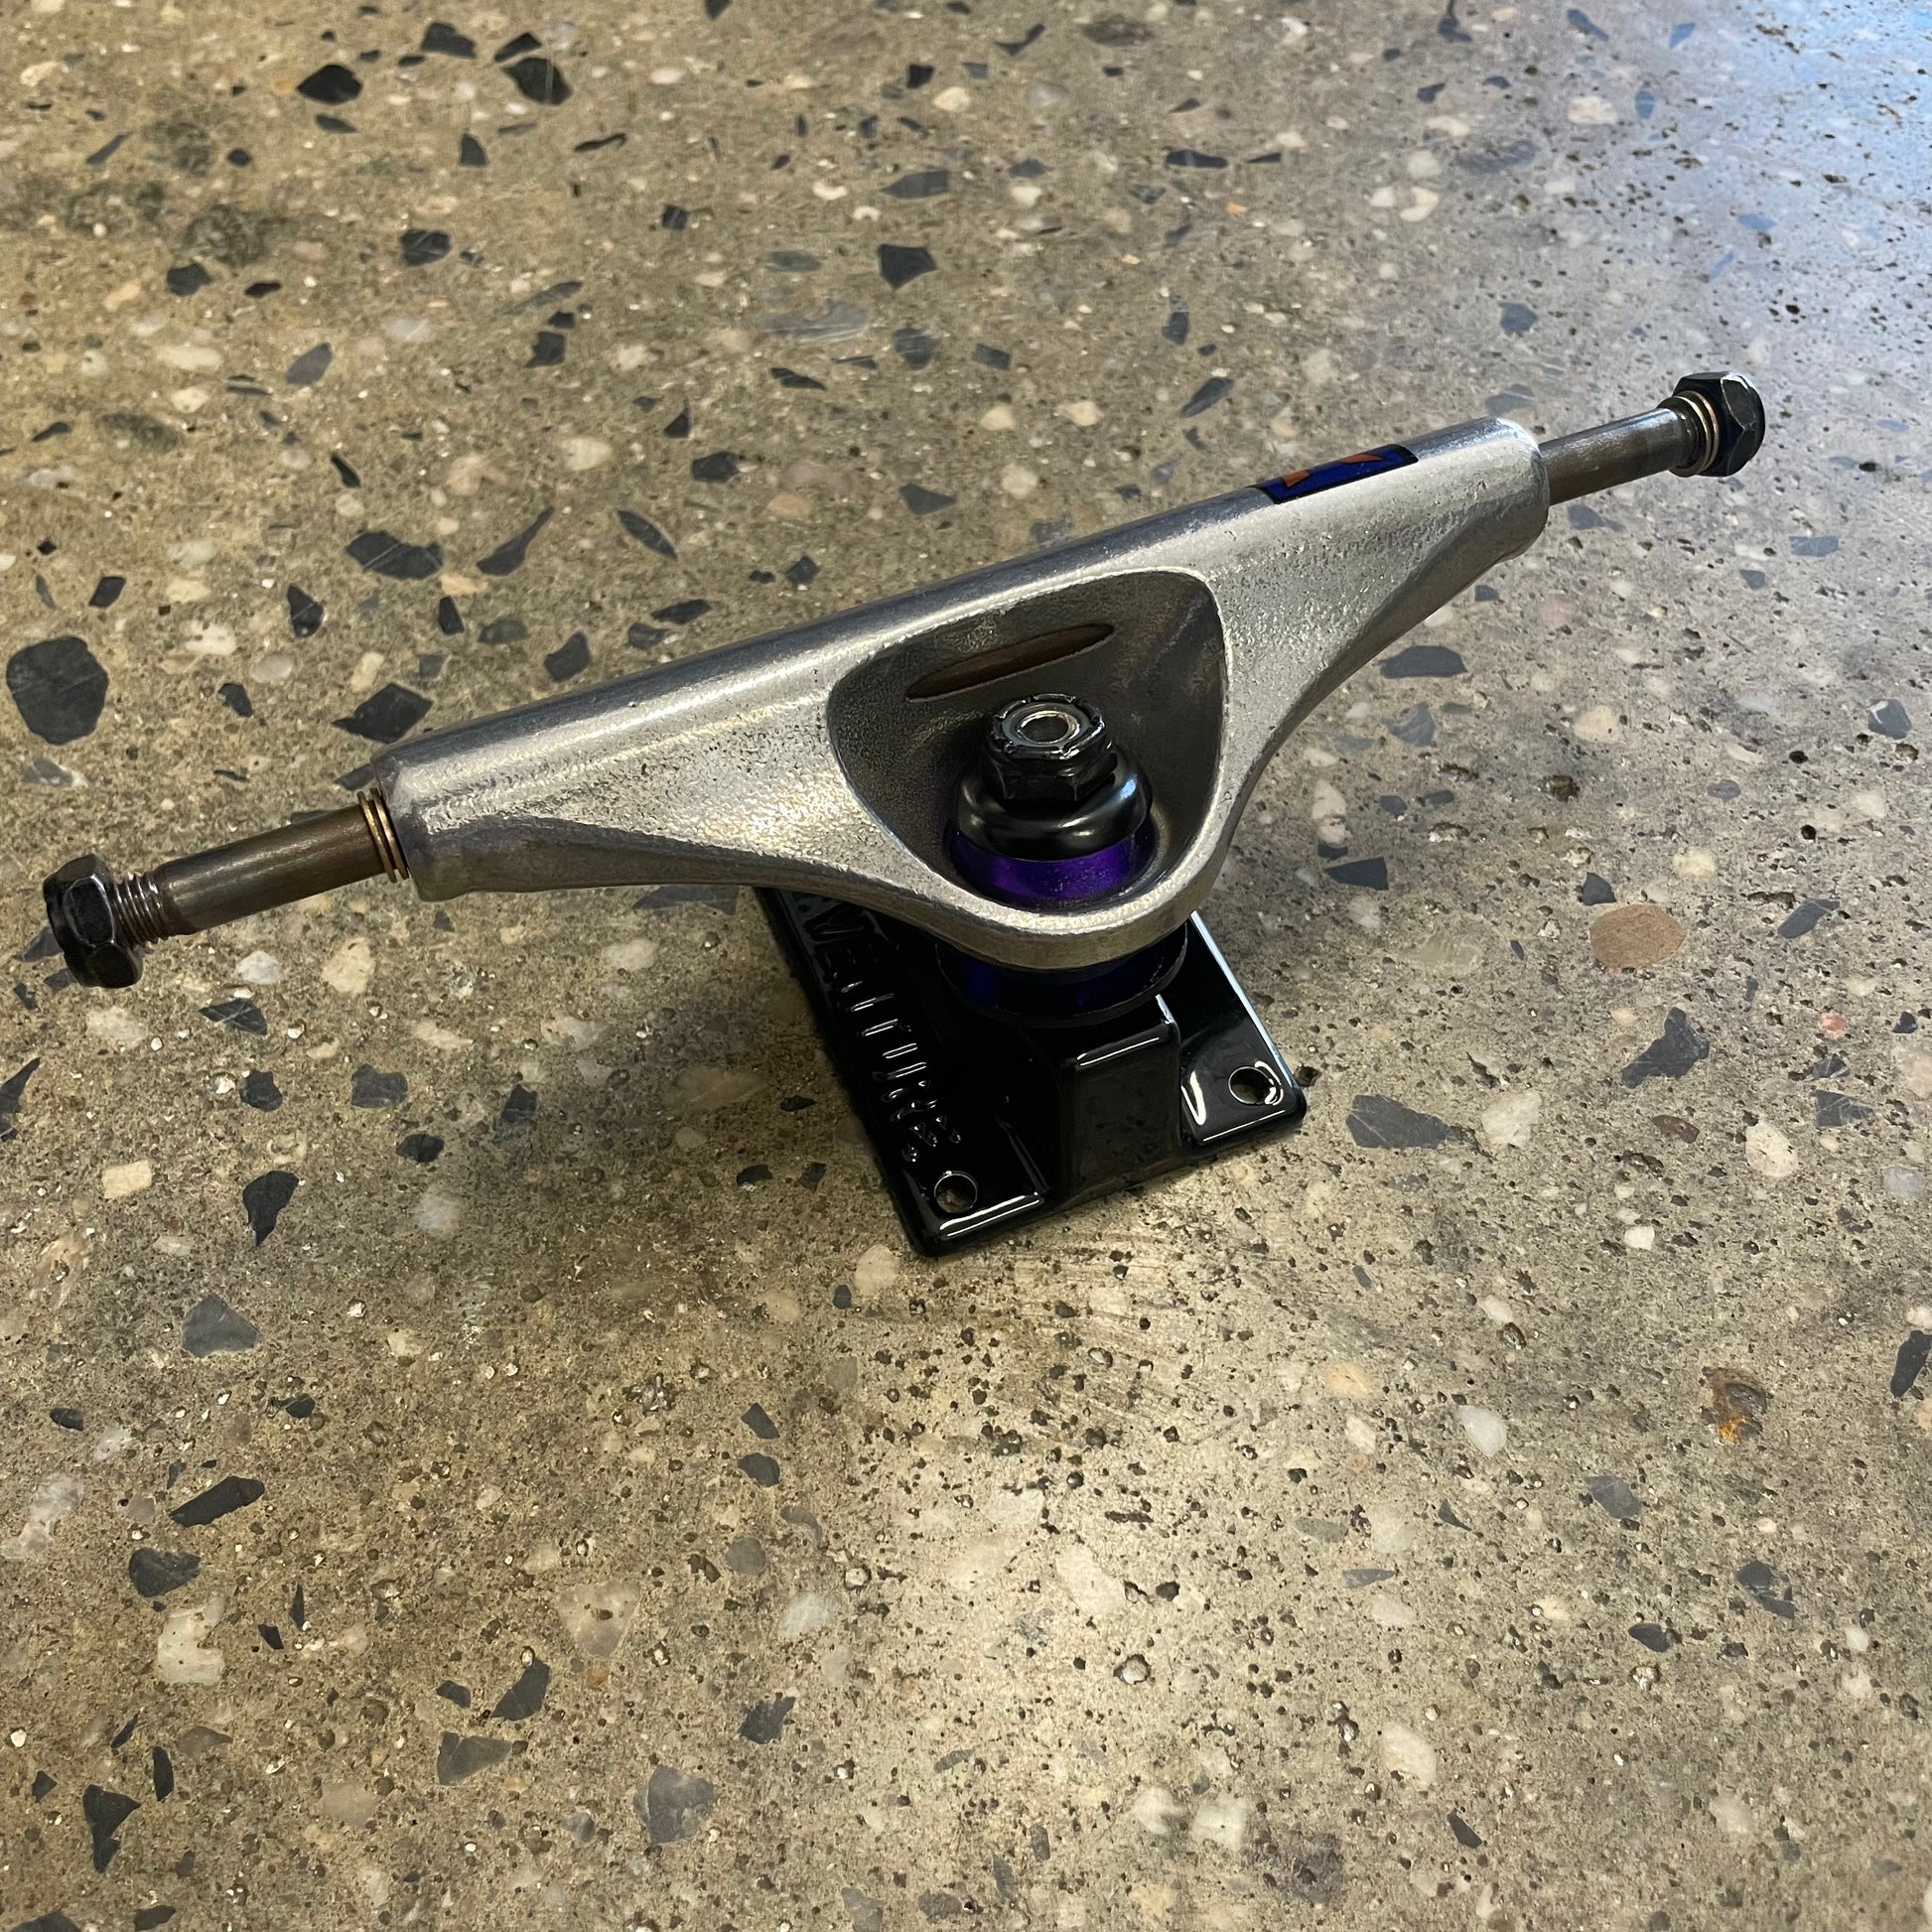 Rear view of silver polished hanger and black baseplate truck, purple bushings